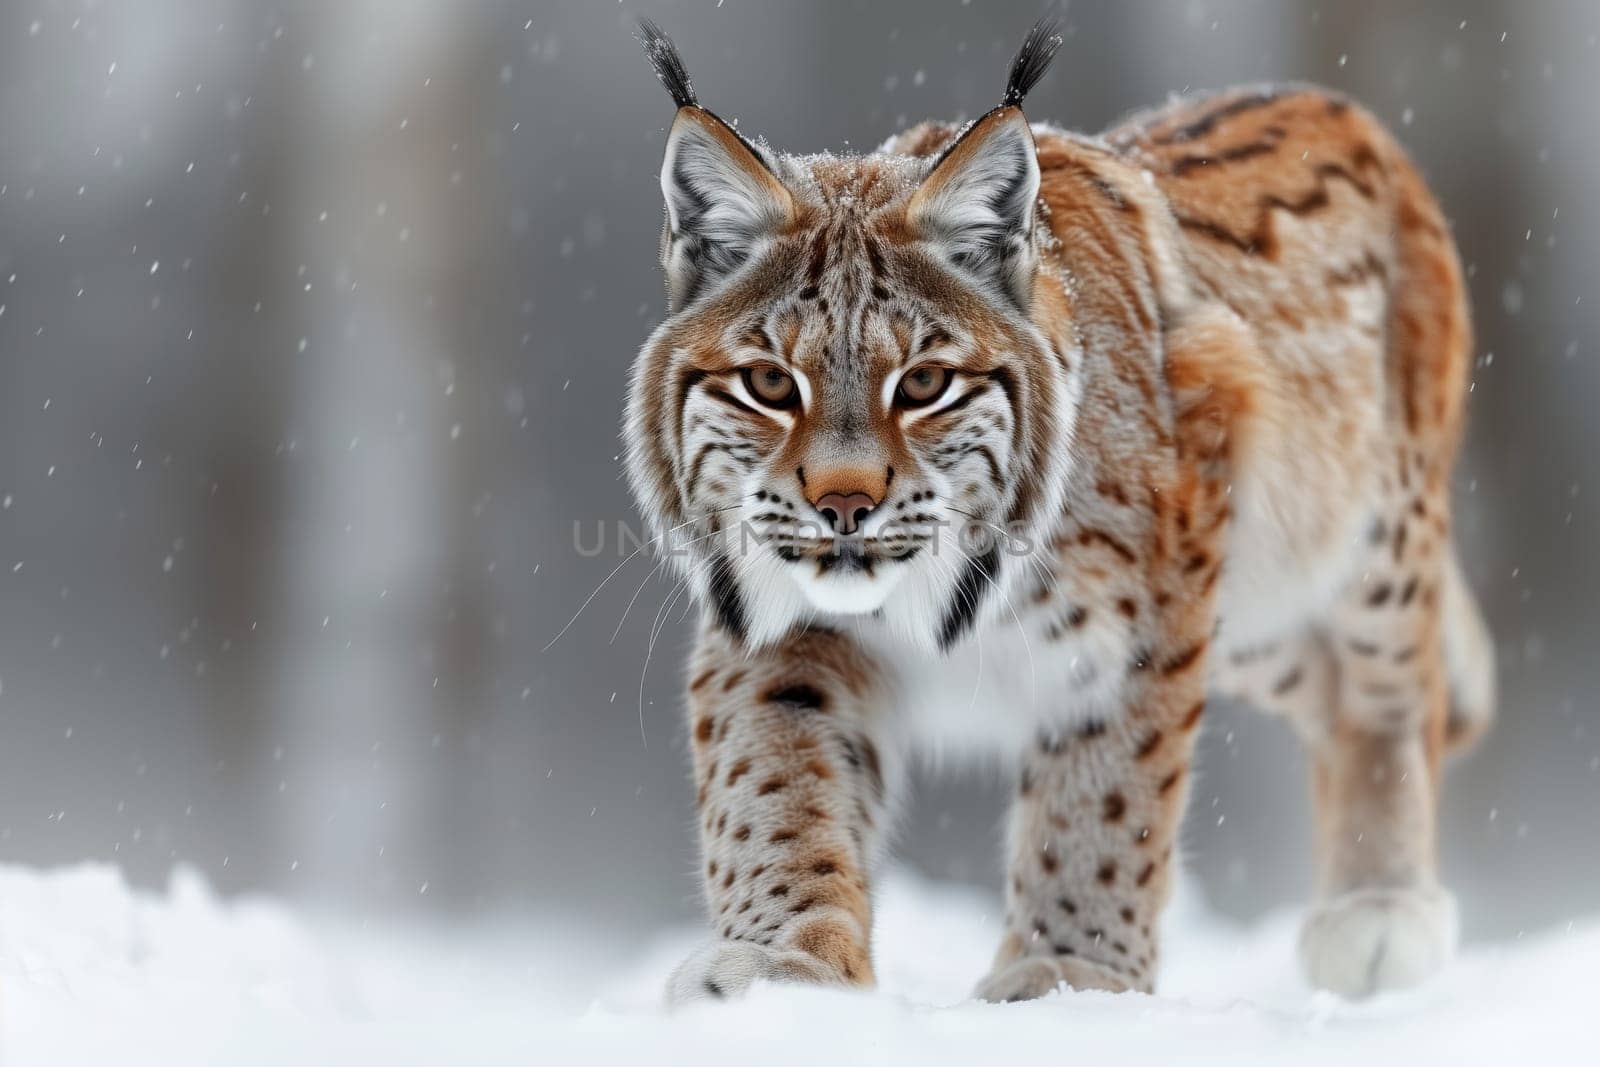 Felidae Carnivore with Big Cat looks at camera in snowcovered terrain by richwolf